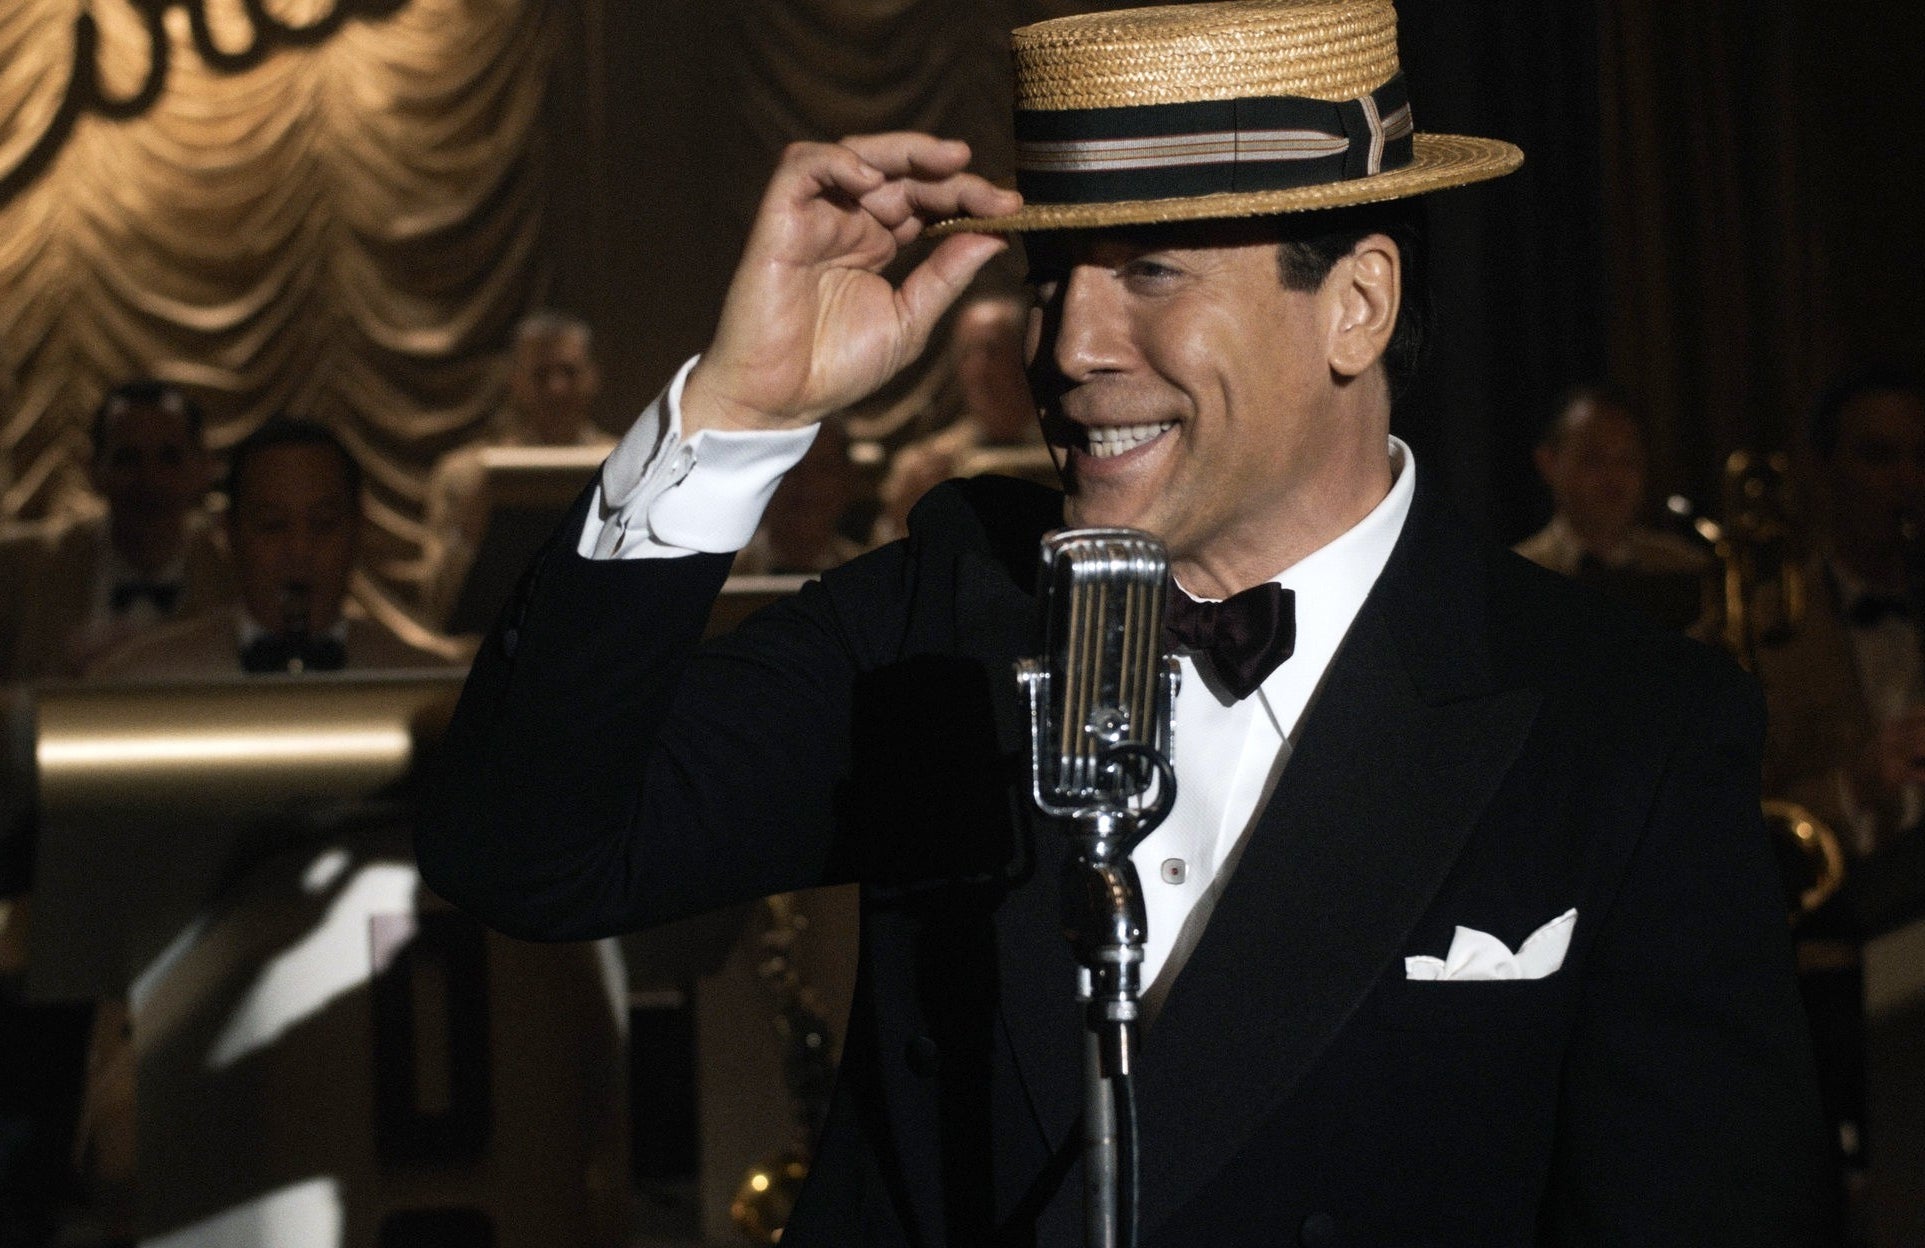 Javier in character as Desi Arnaz in front of a microphone